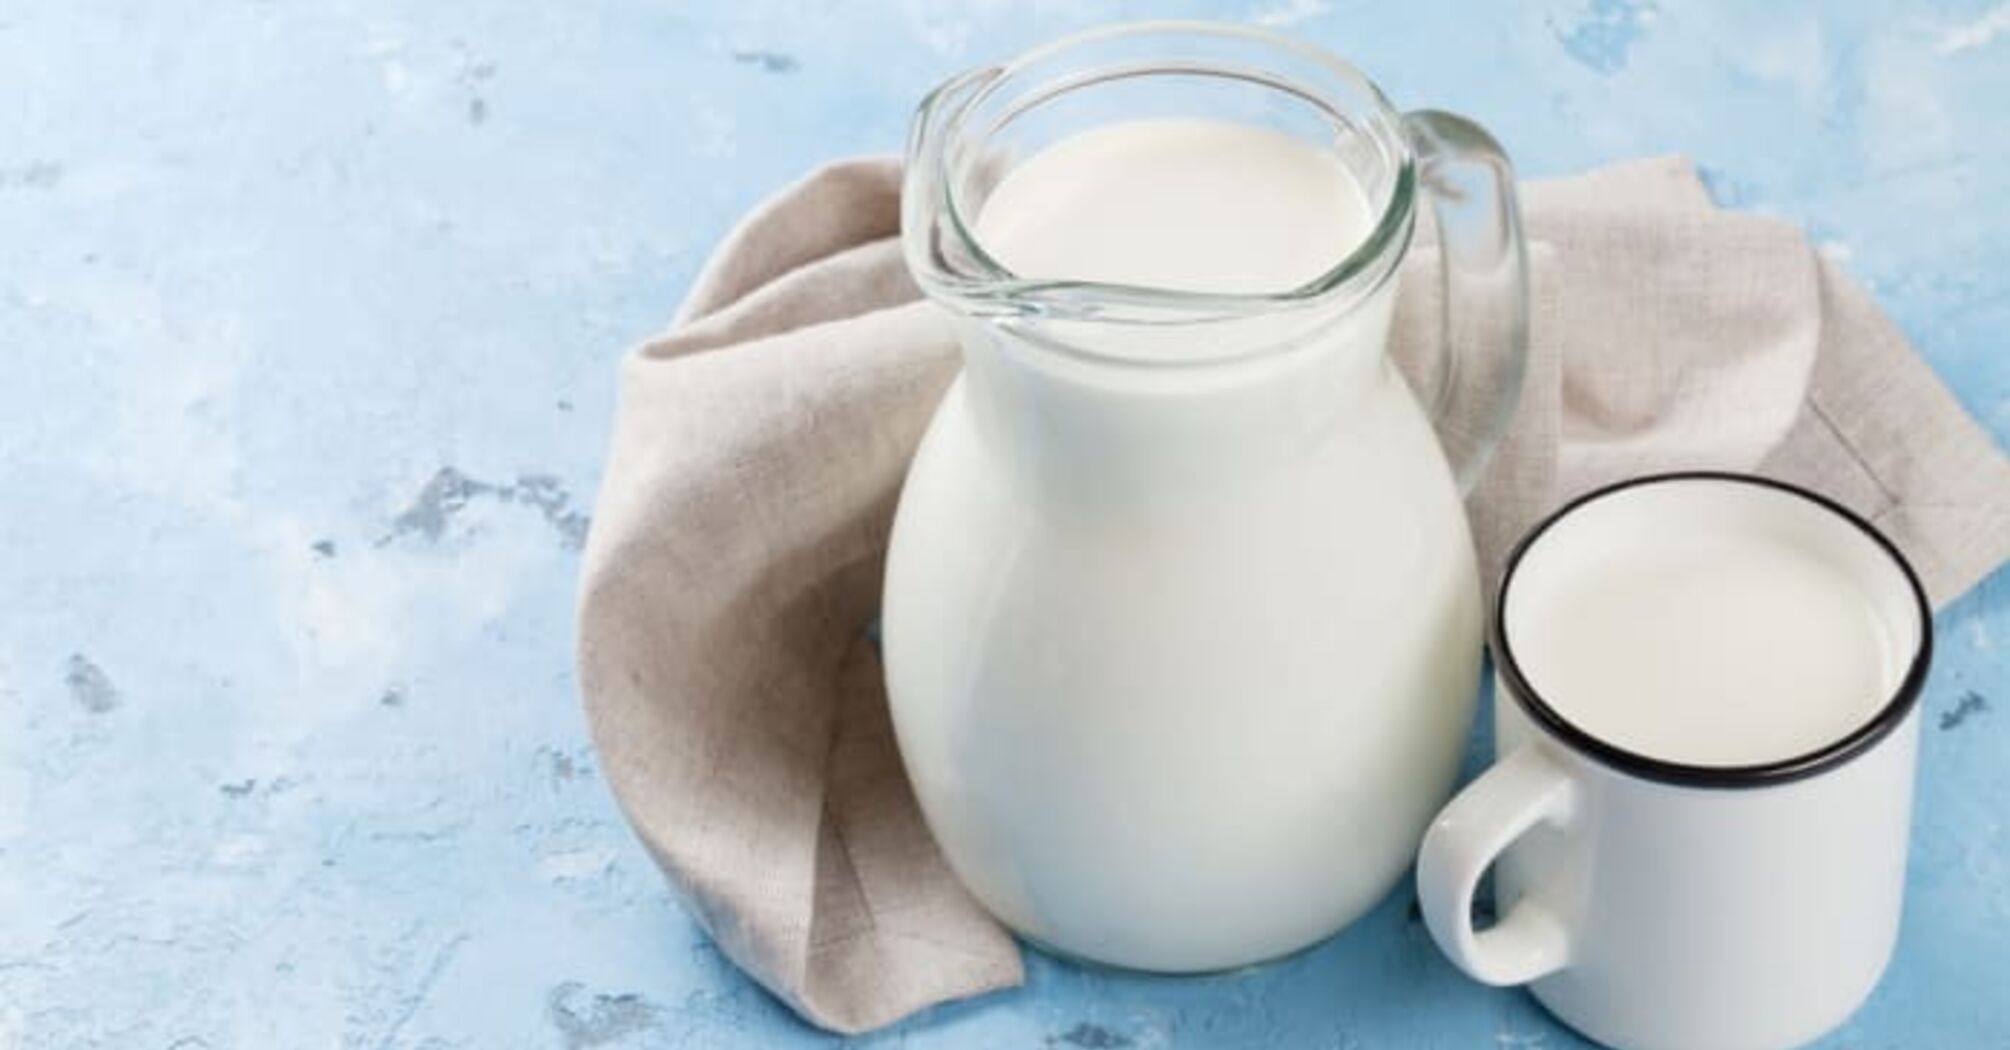 What to add to milk to prevent it from souring